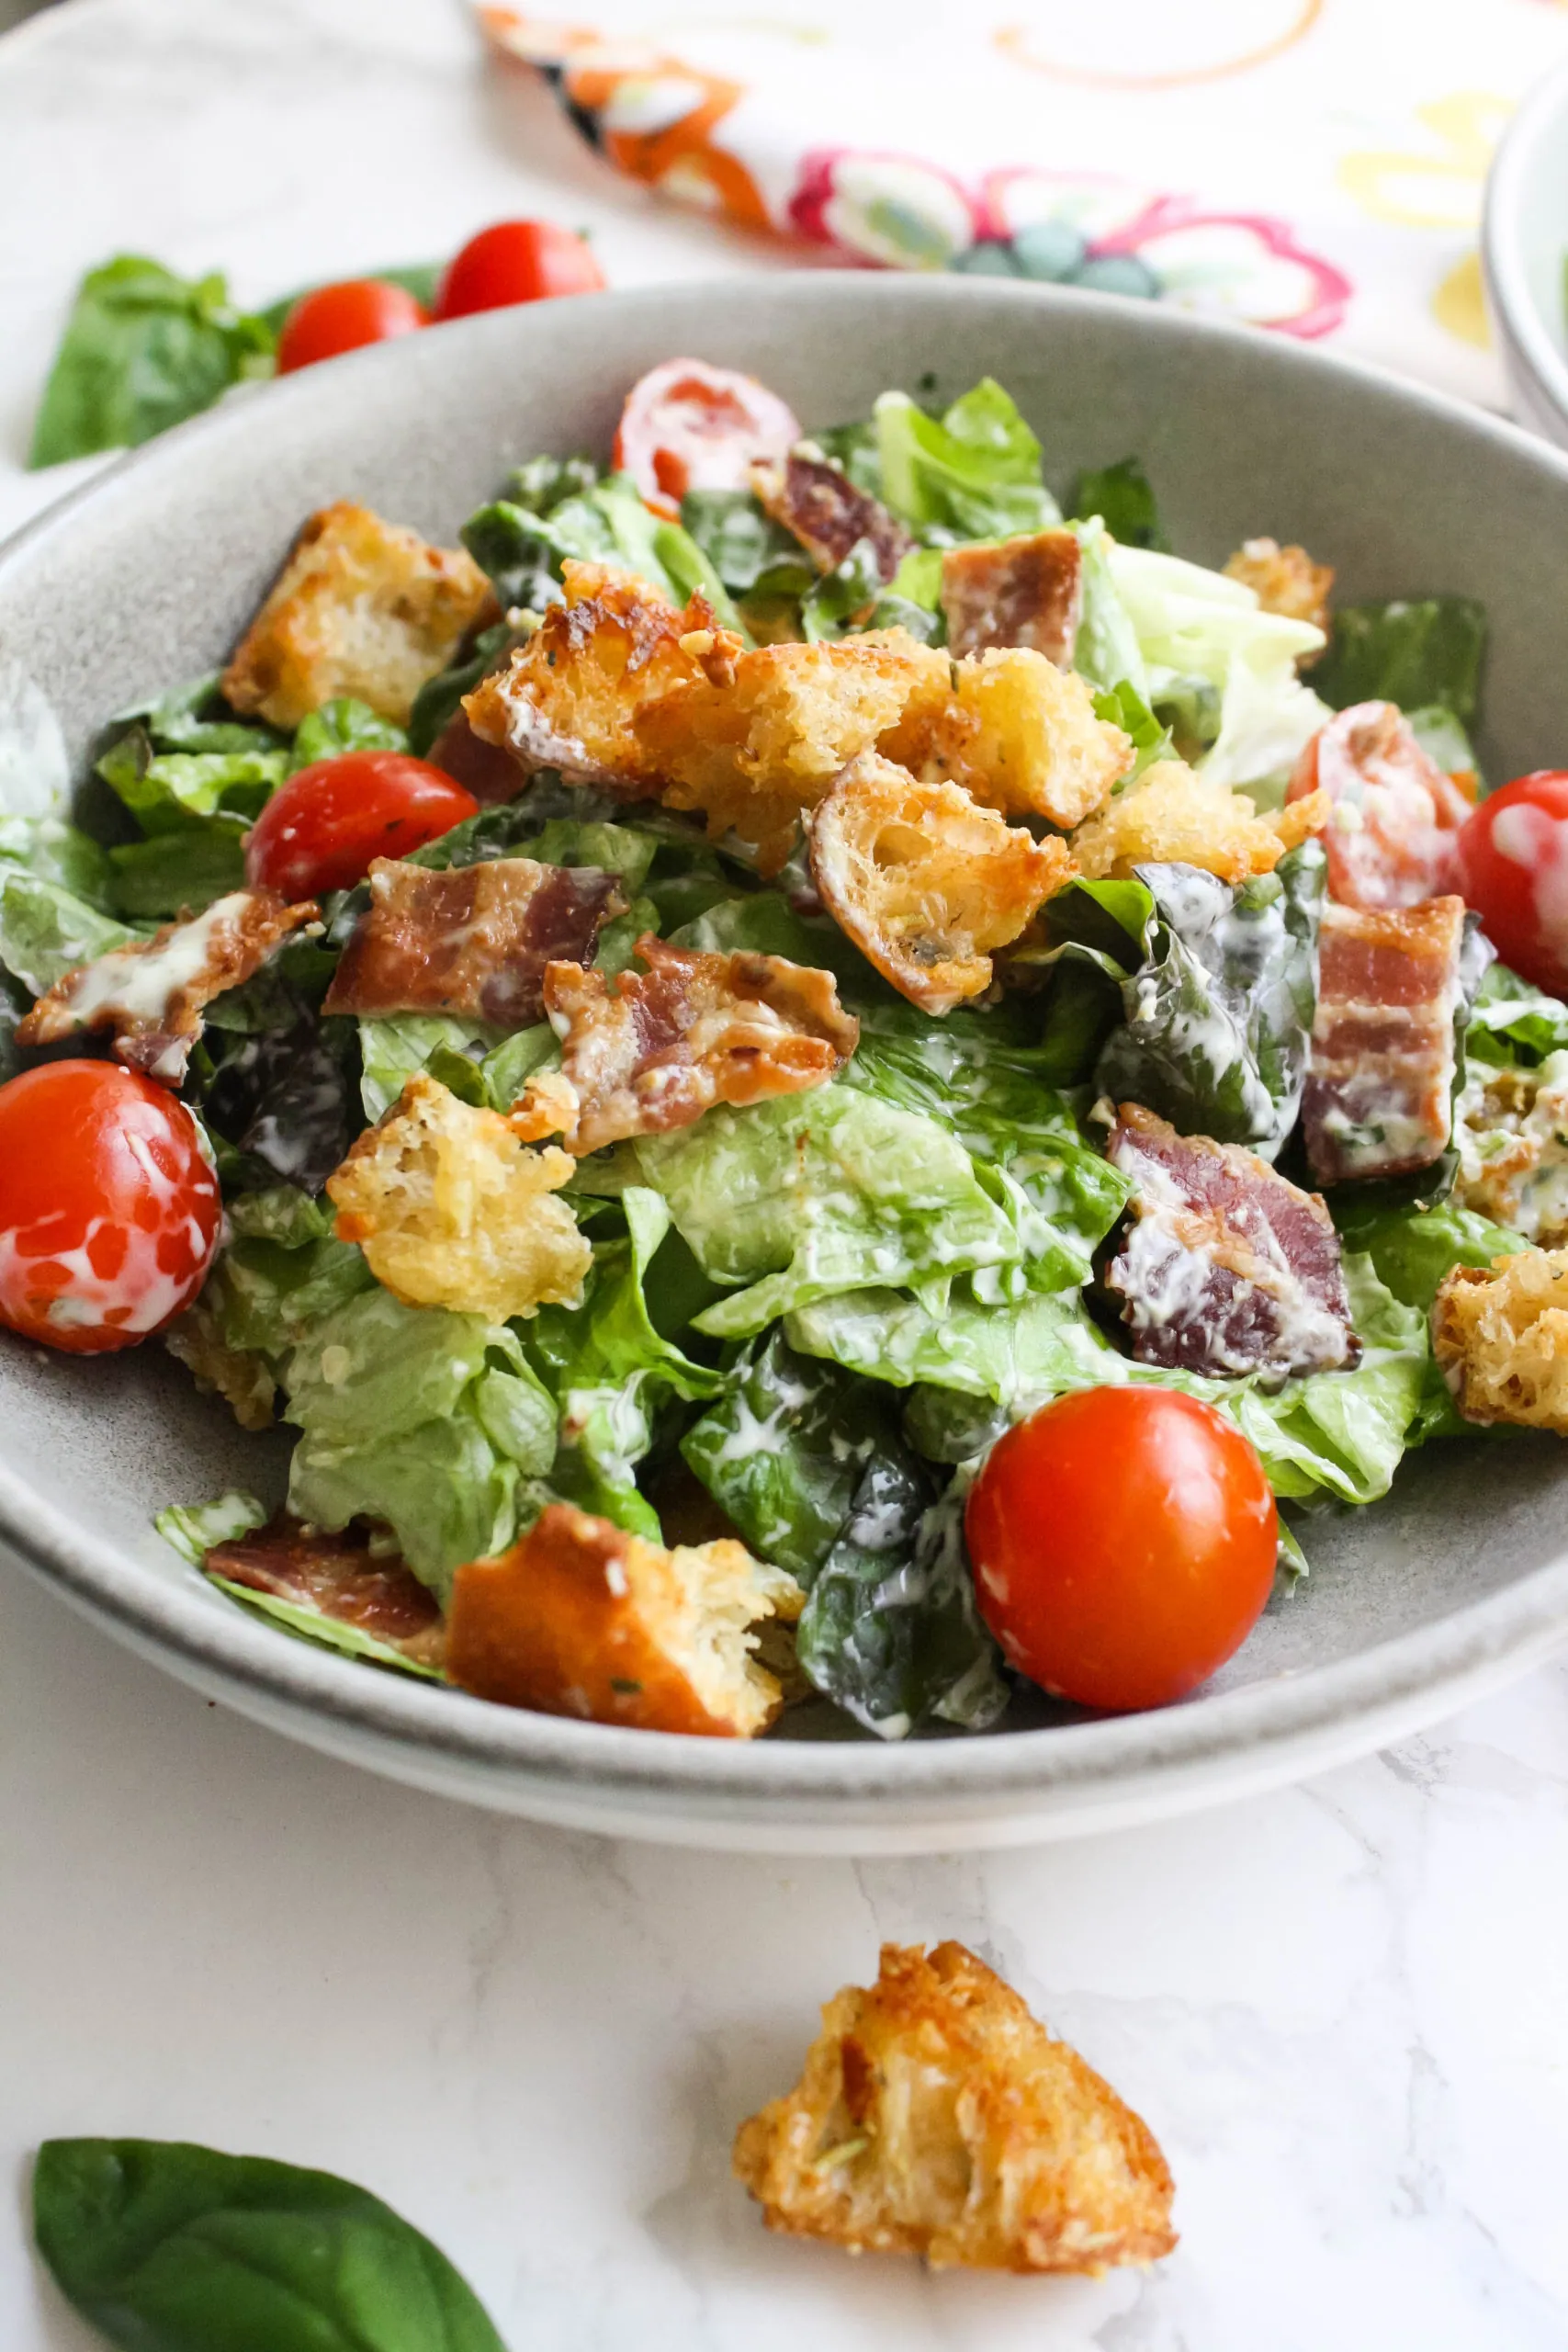 Easy salad recipes include this BLT Salad with Garlic-Basil Dressing